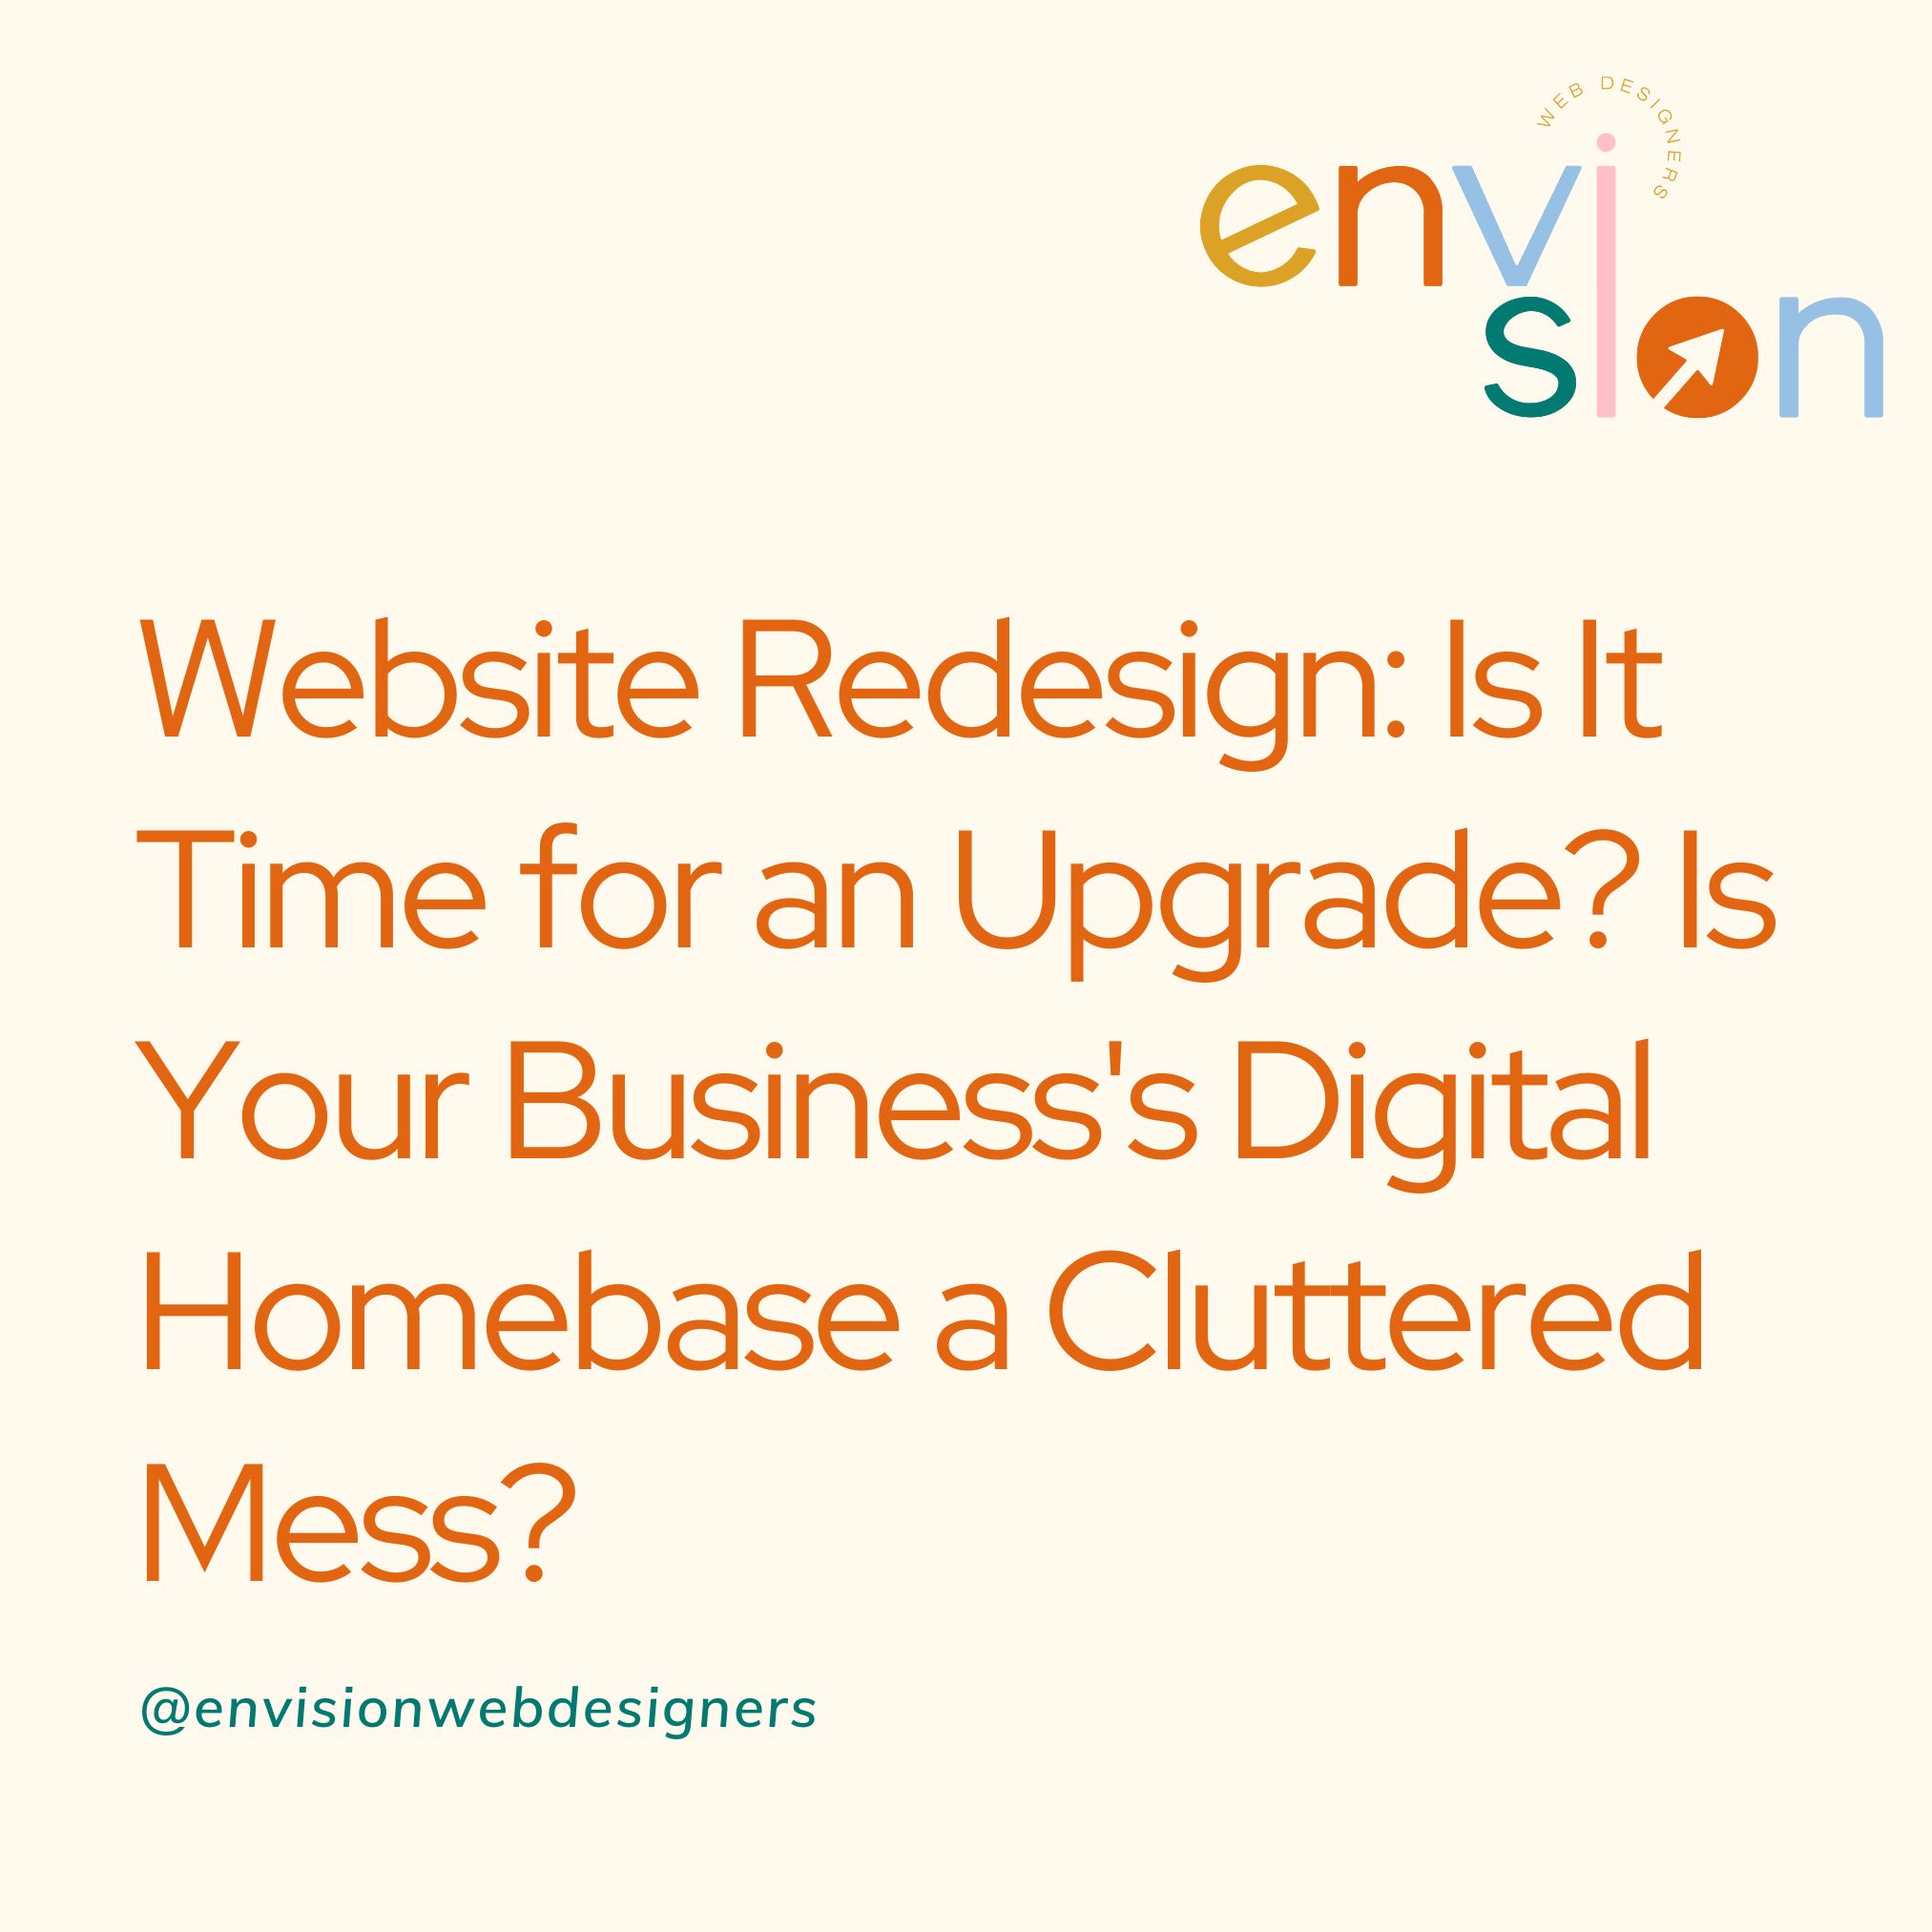 Envision Web Designers Salida - Custom Website Designs, Hosting and Organic SEO - Is it time for a website redesign?